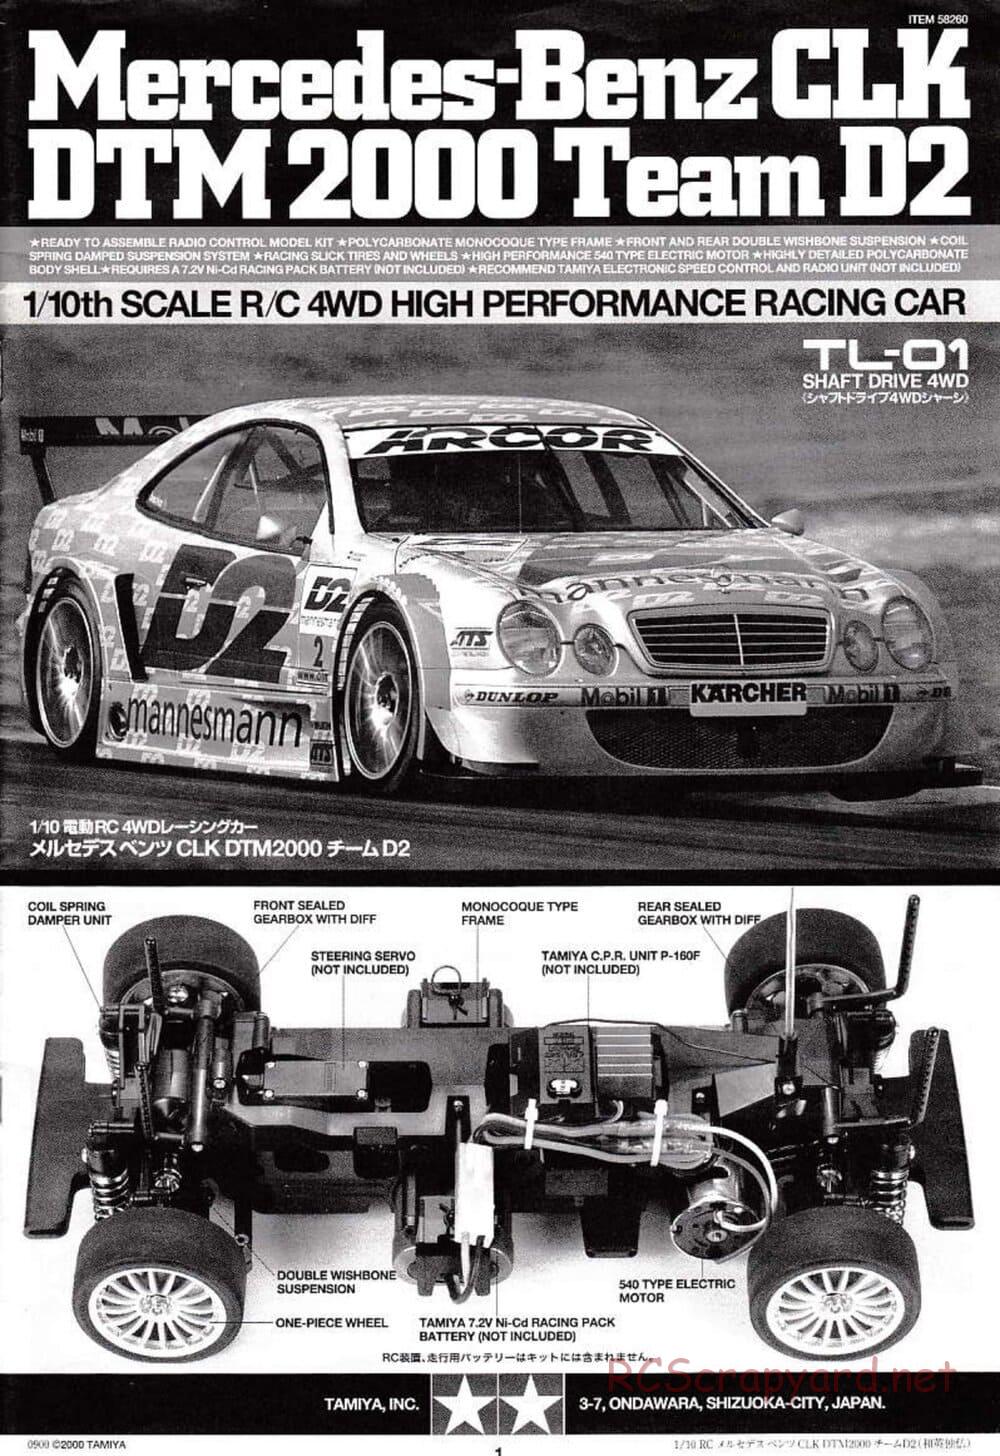 Tamiya - Mercedes Benz CLK DTM 2000 Team D2 - TL-01 Chassis - Manual - Page 1